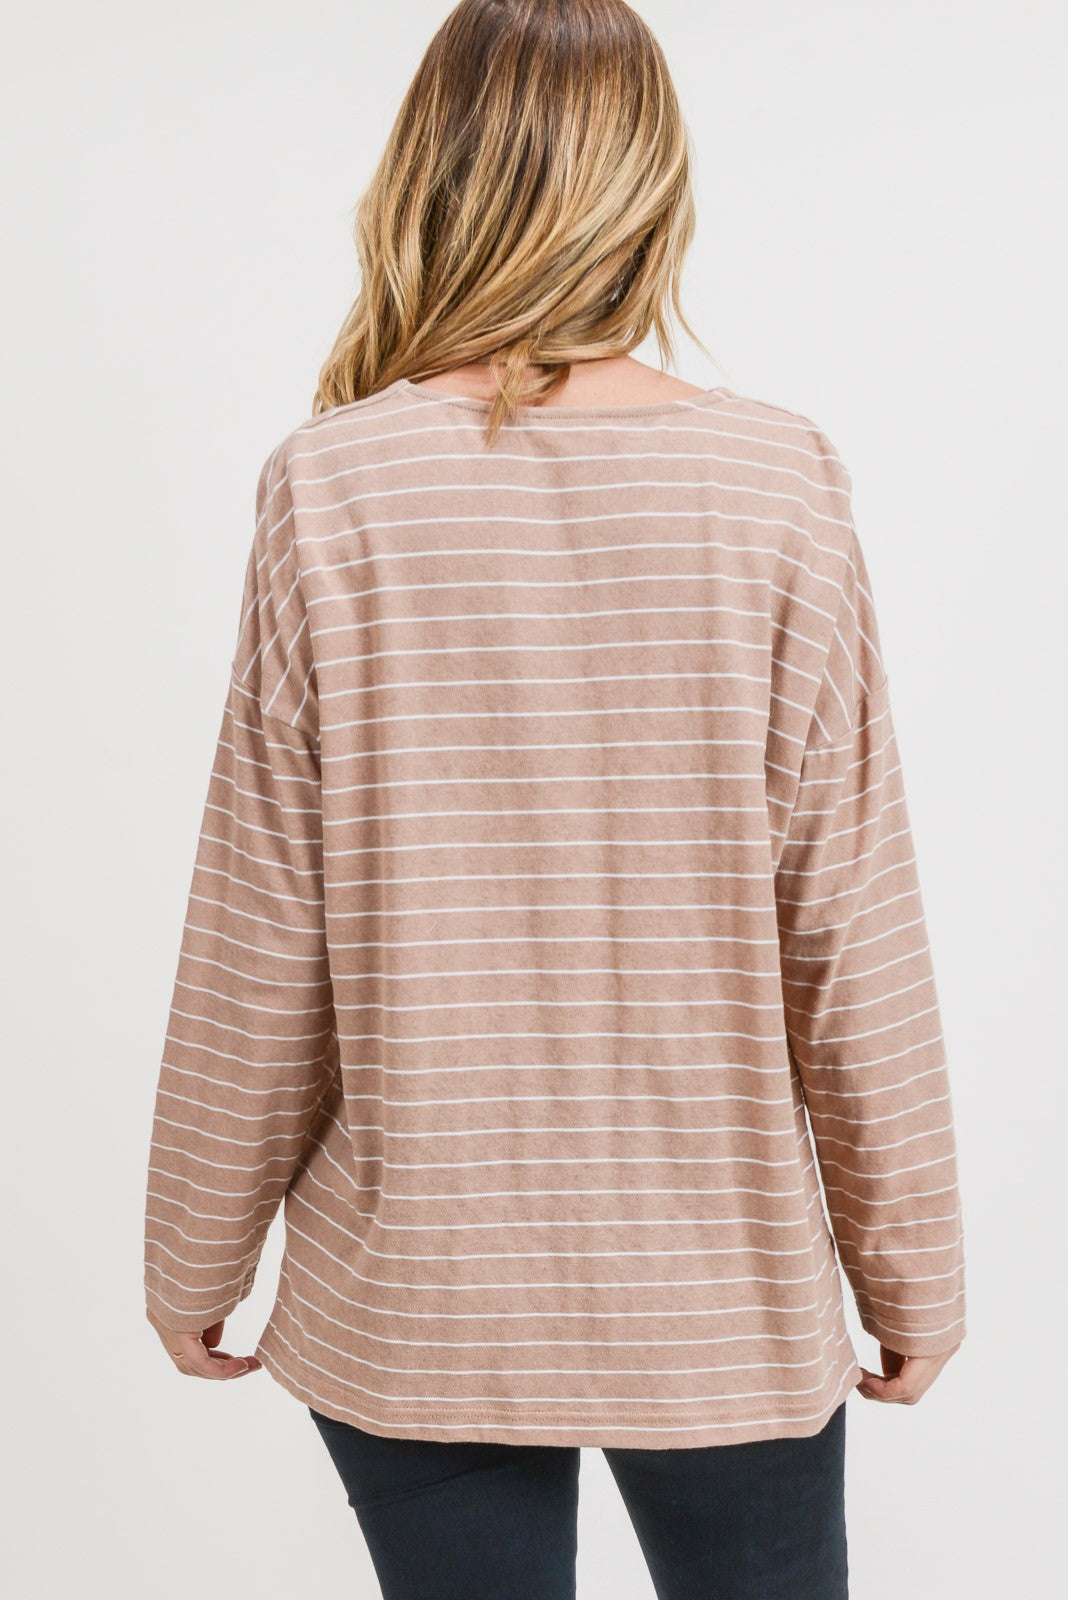 Simply Taupe Striped Top